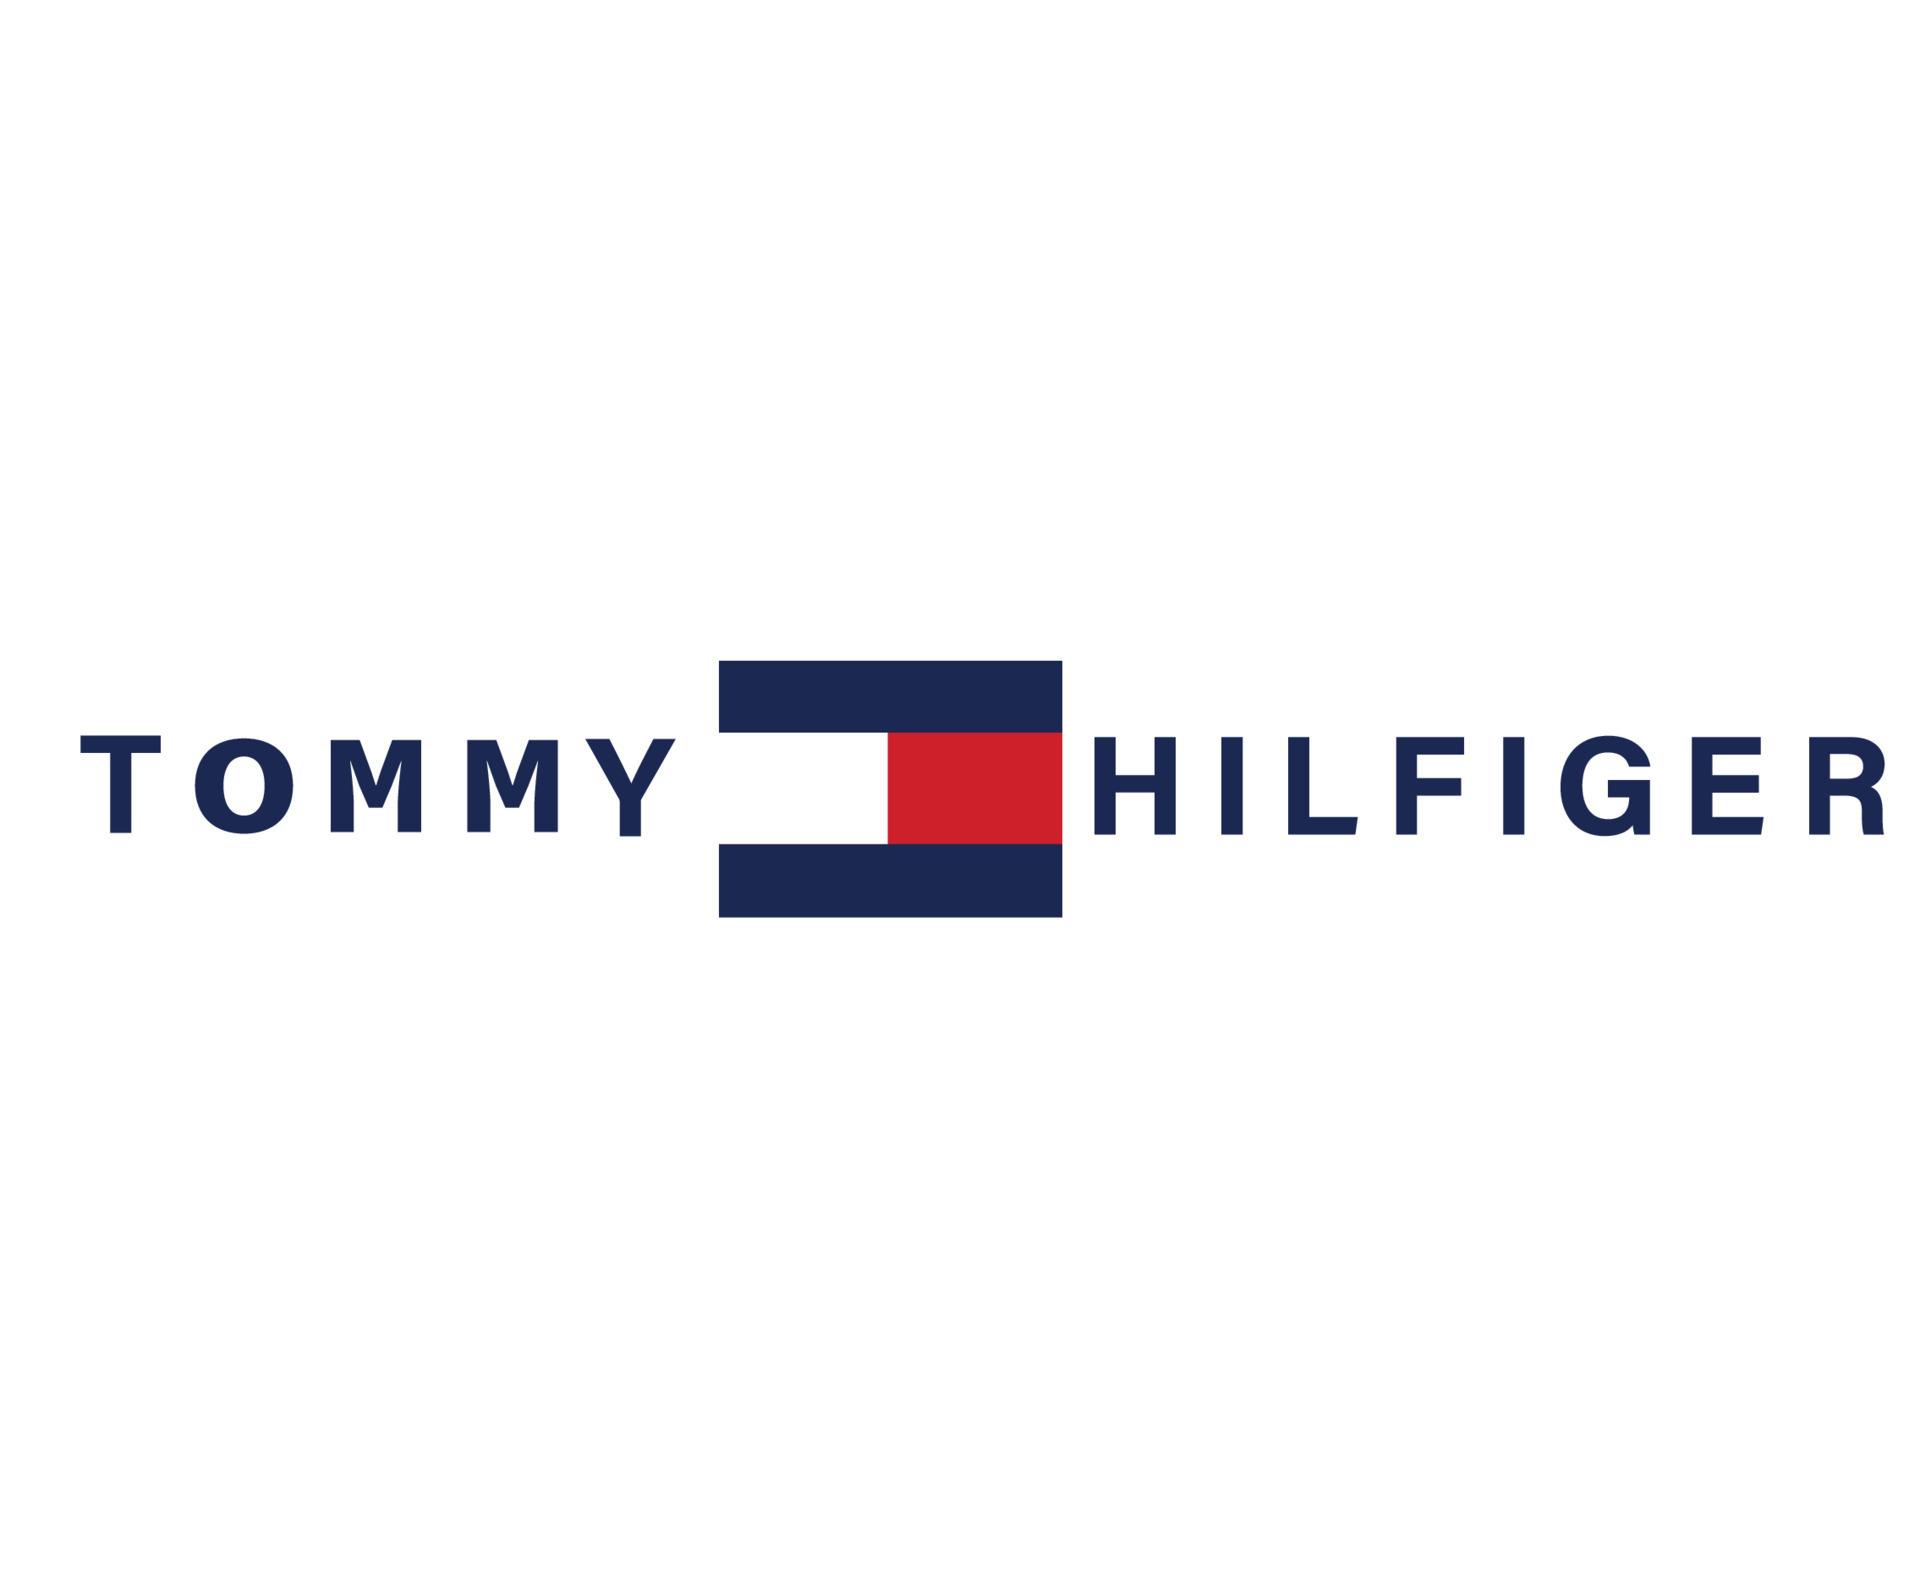 tommy-hilfiger-logo-red-and-blue-symbol-with-name-clothes-design-icon-abstract-football-illustration-with-white-background-free-vector